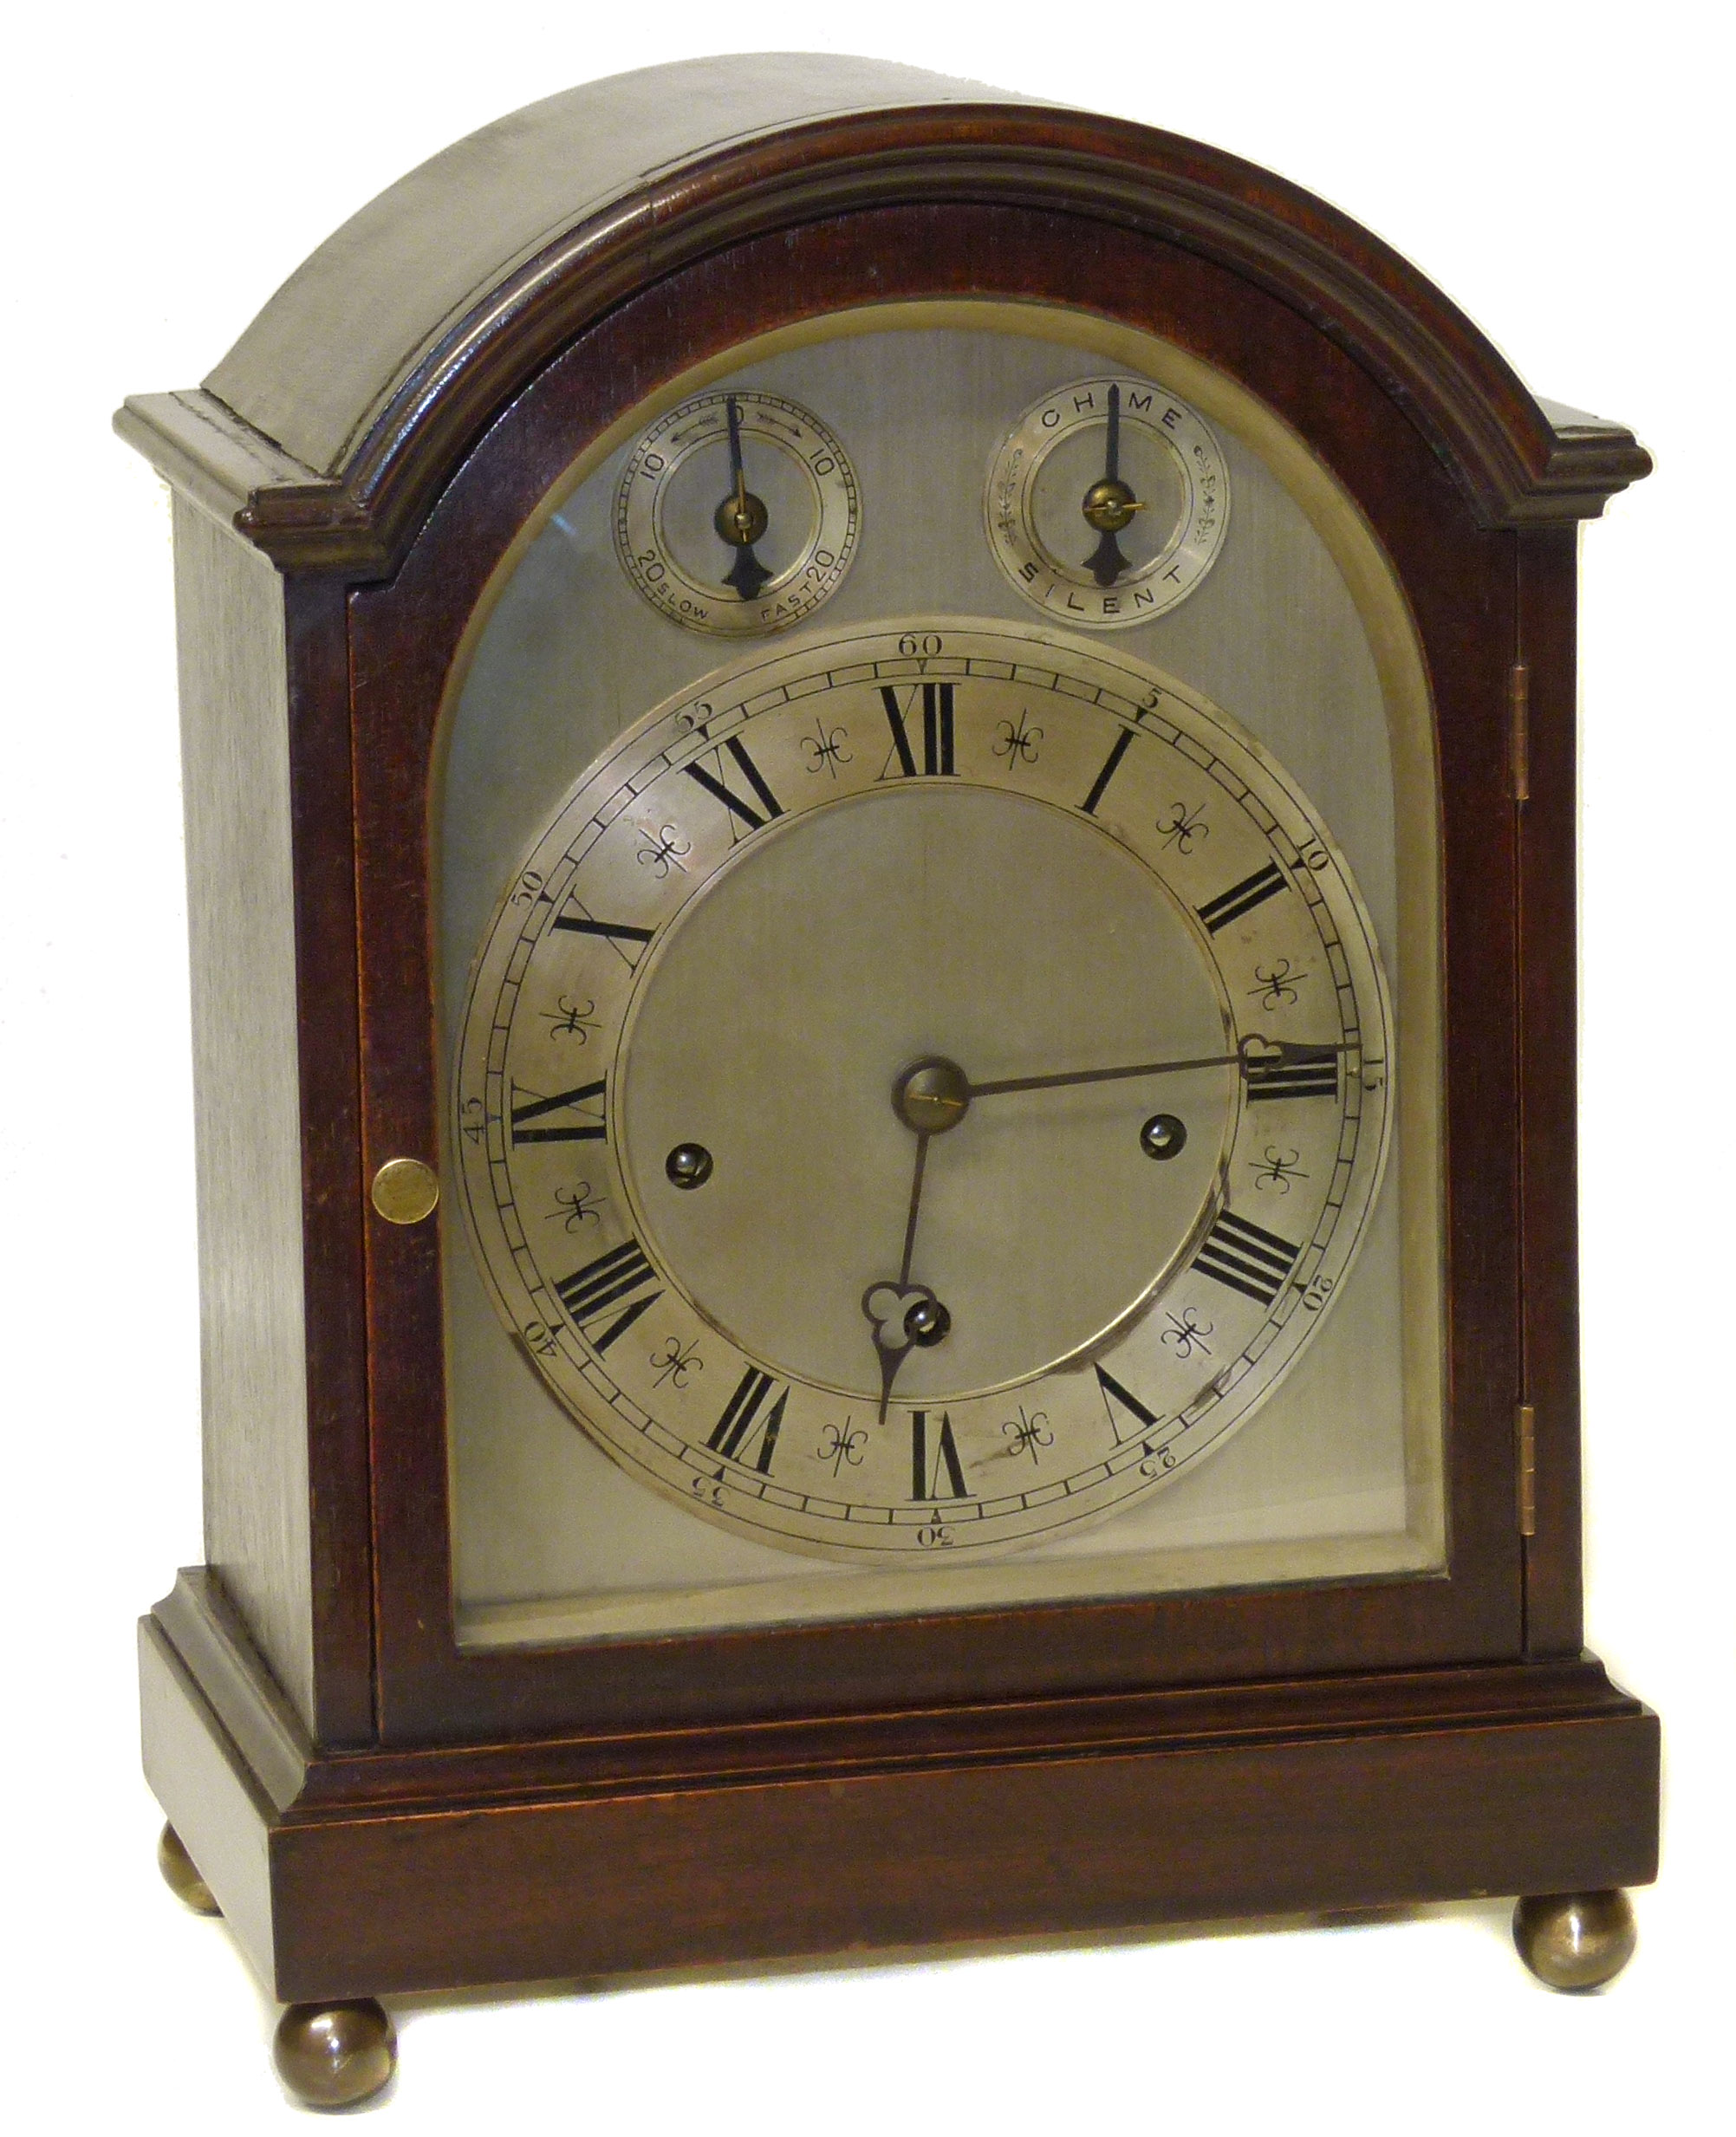 Early 20th century domed top bracket clock on ball feet. Condition reports are not available for